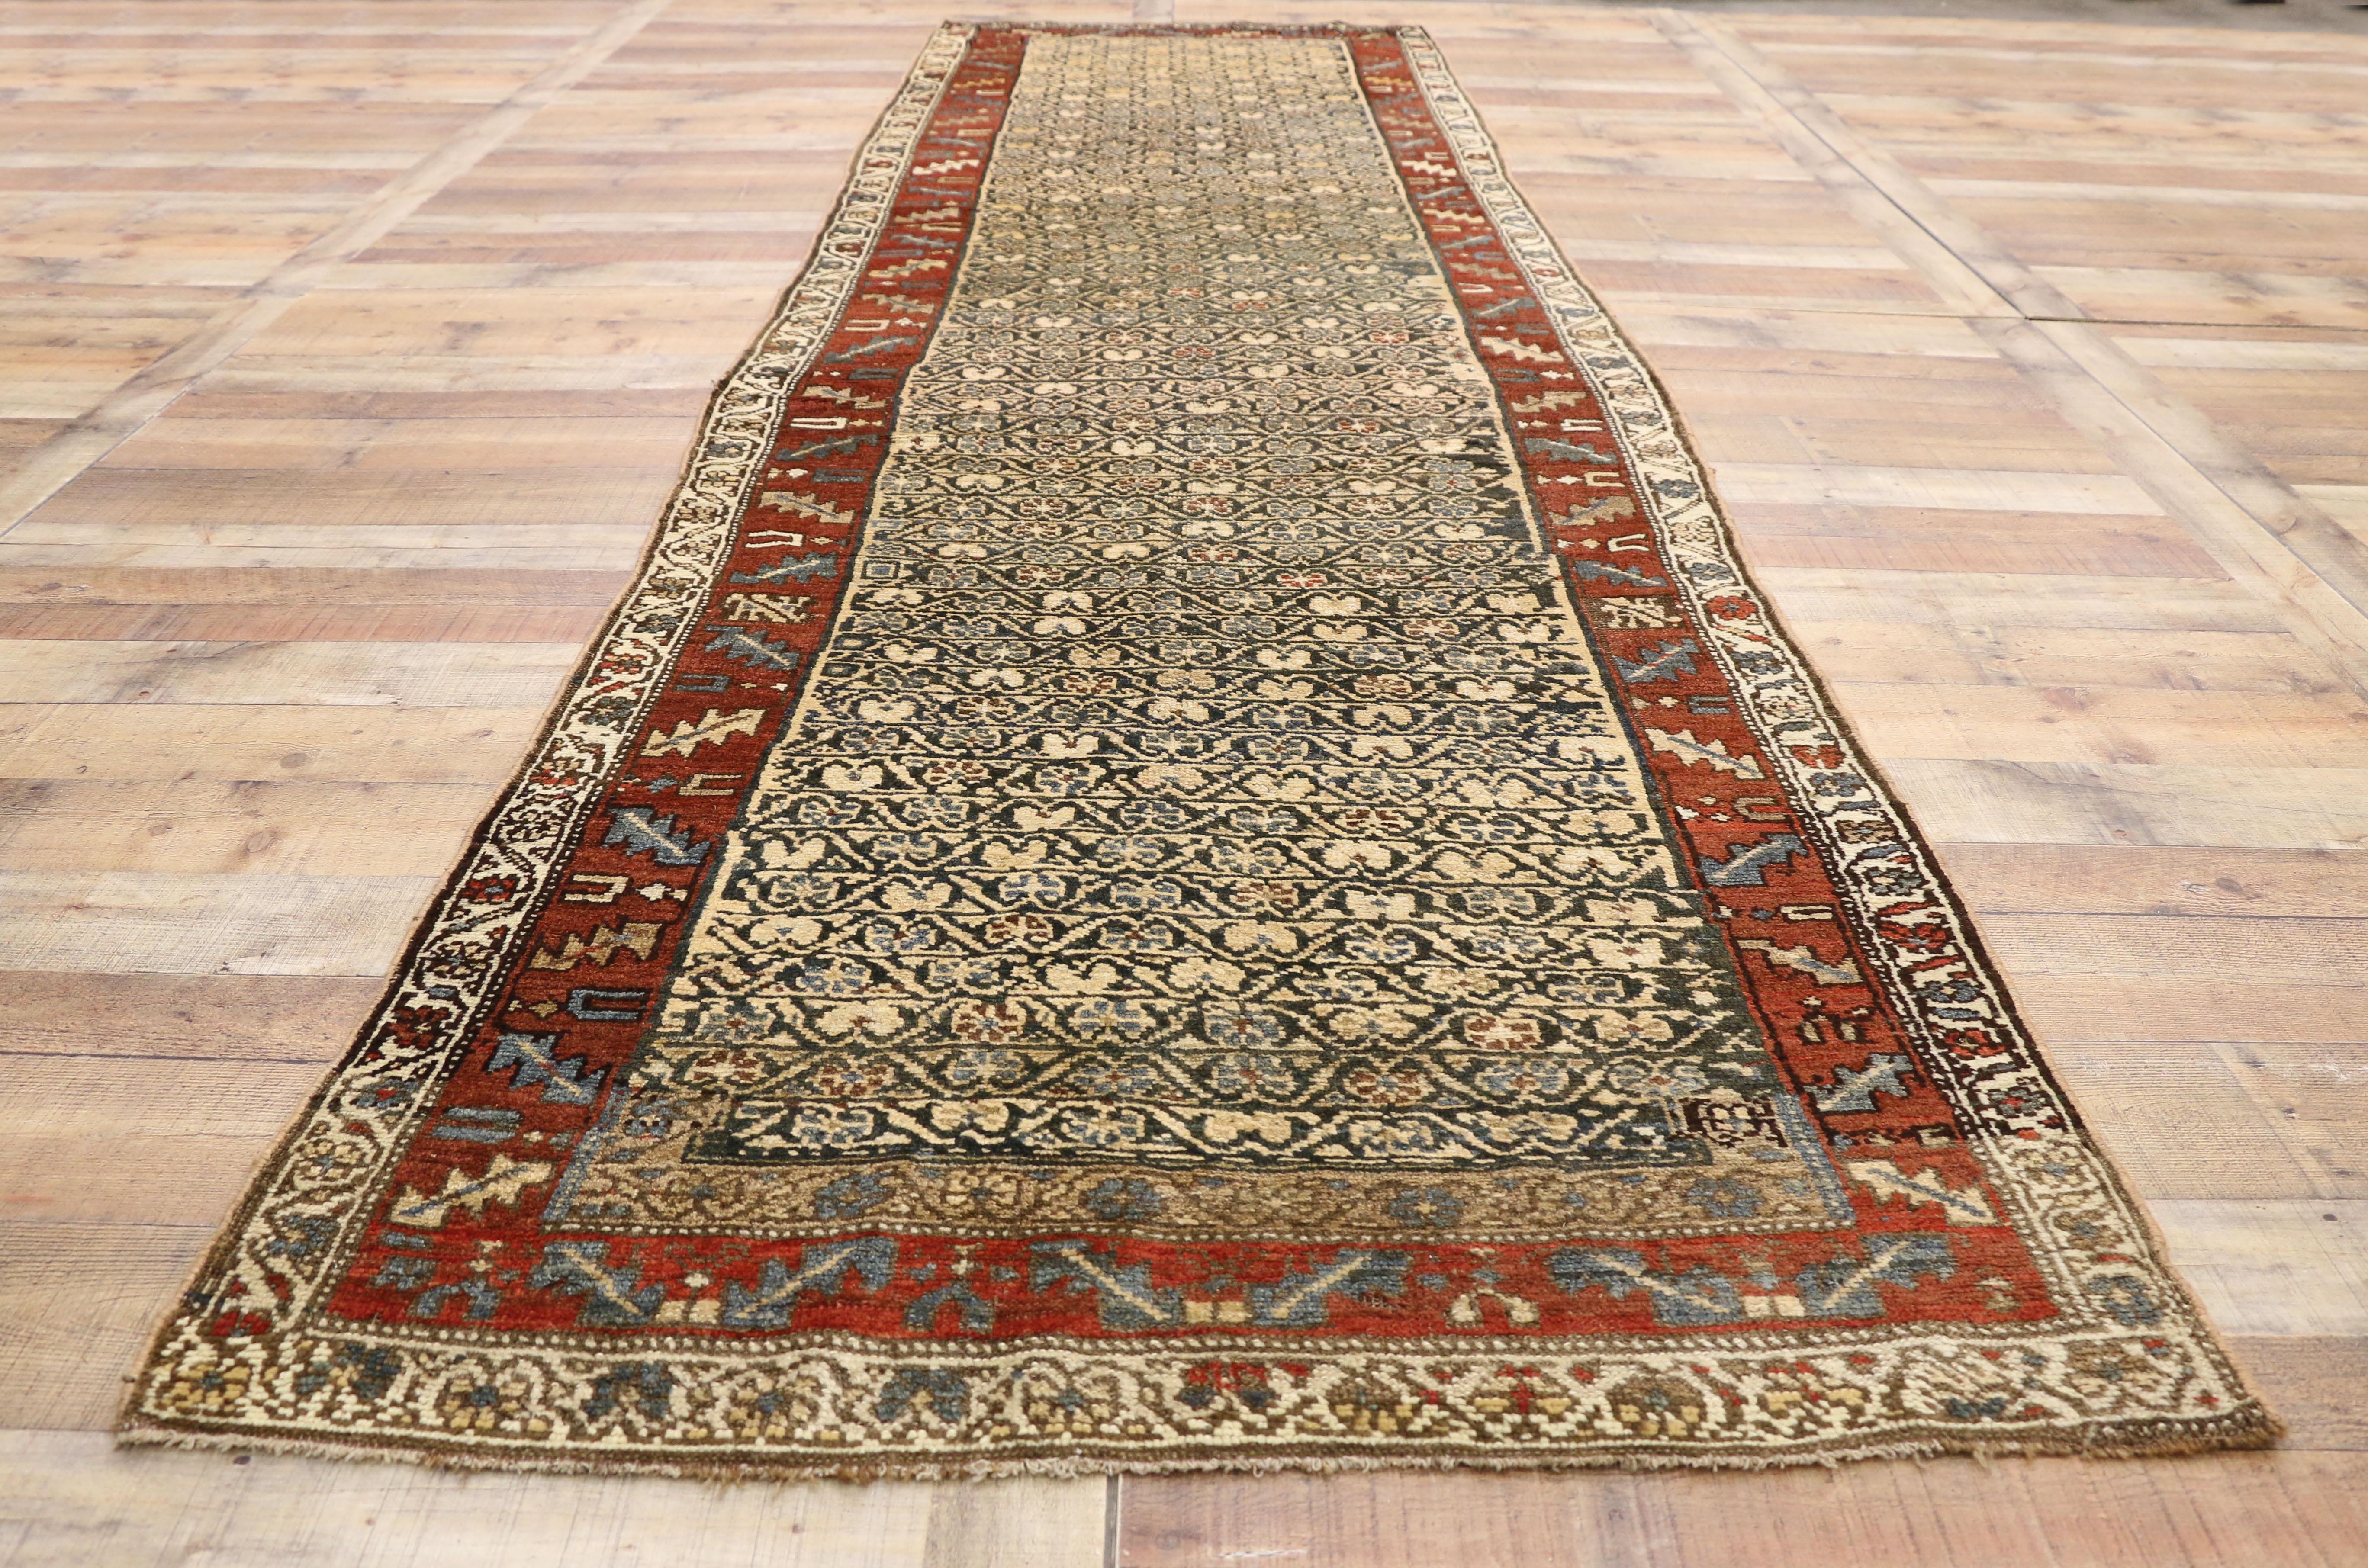 Wool Antique Persian Kurdish Hallway Runner with Artisan Arts & Crafts Style For Sale